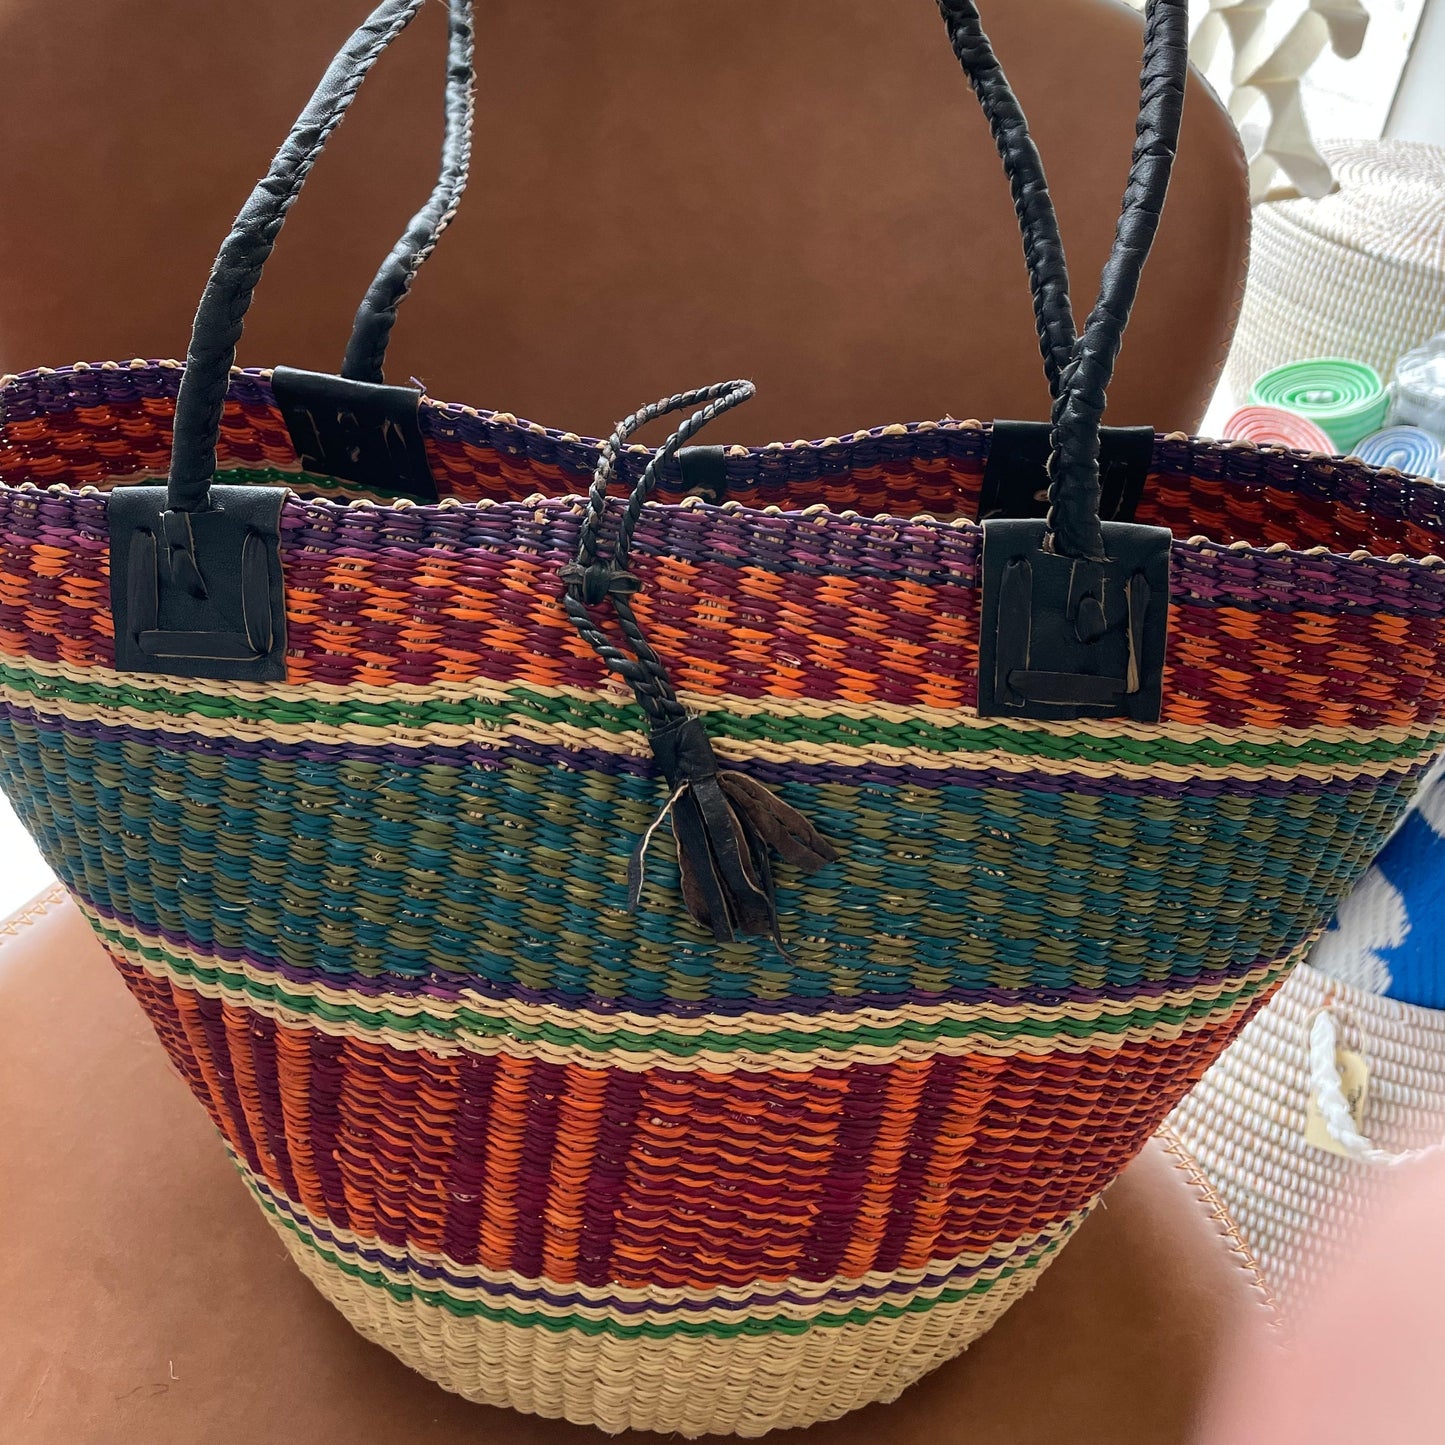 Shoulder bag handwoven in elephant grass. Multi colored. Fair Trade from Ghana